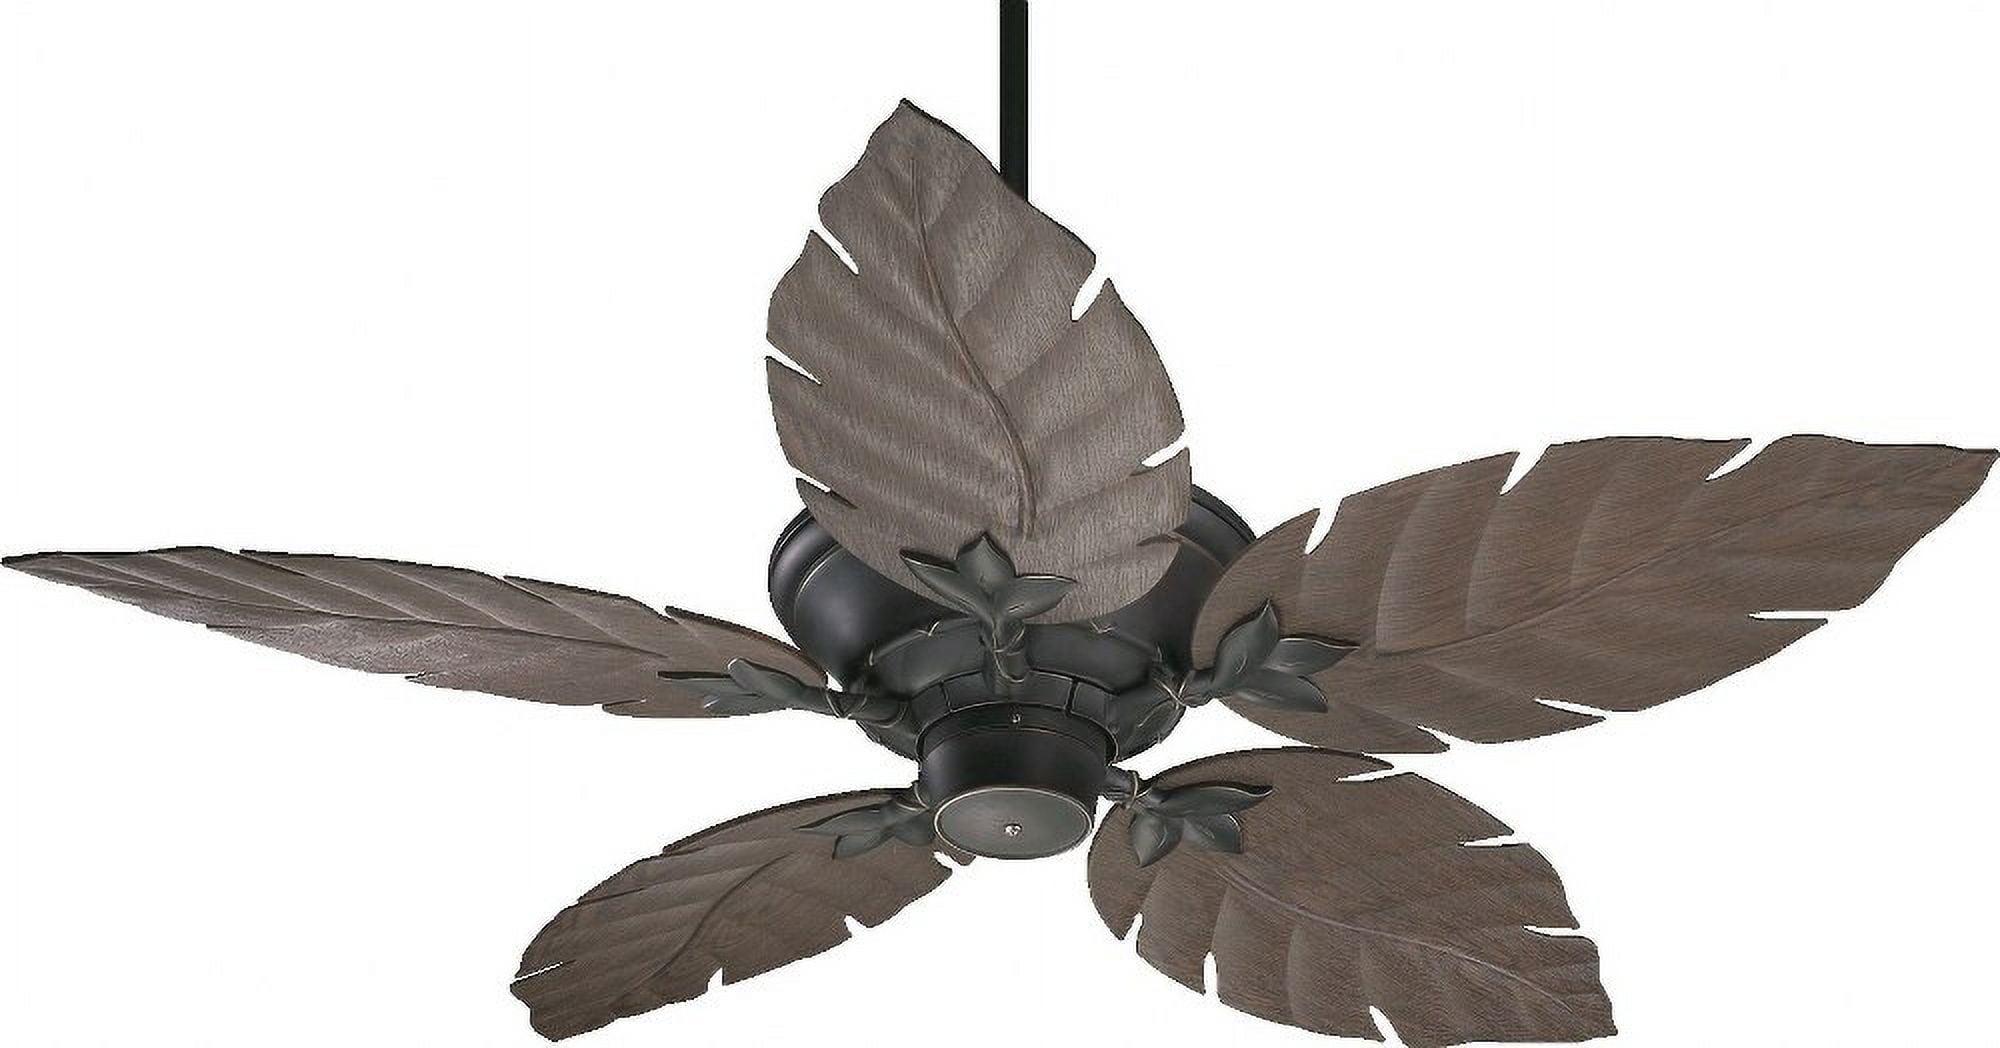 Monaco Tropical Black and Walnut 52" Ceiling Fan with Lighting and Remote